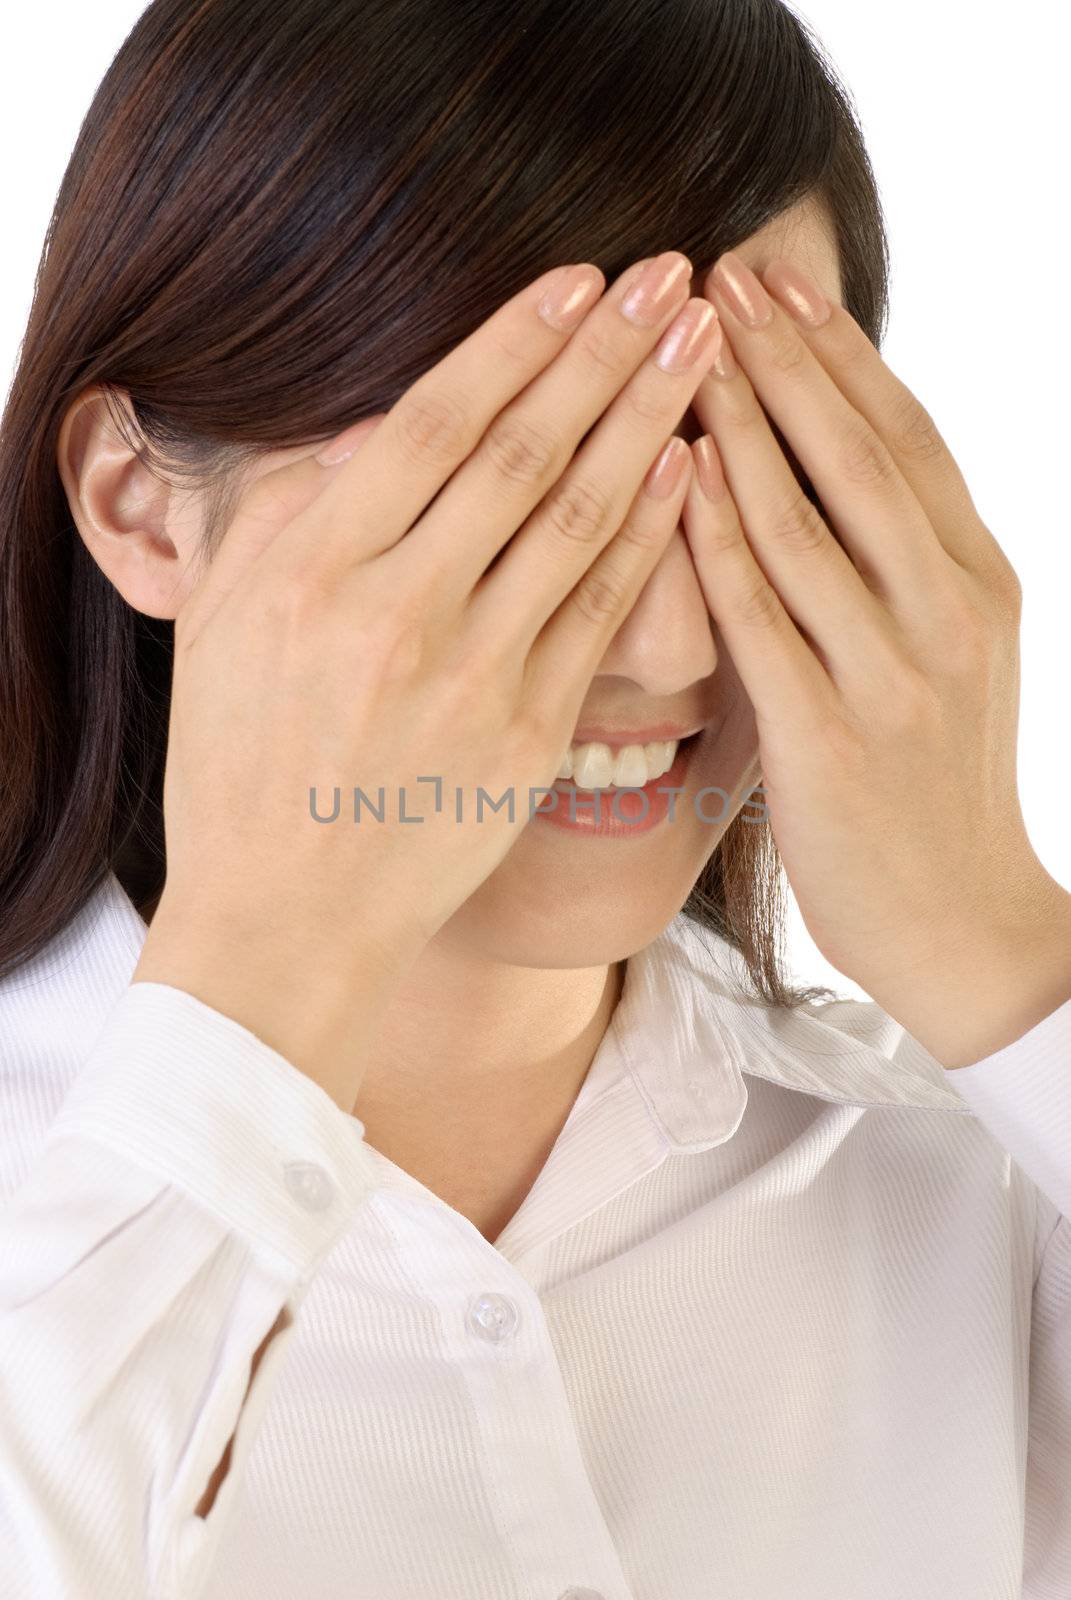 See no evil sign of Asian businesswoman hand on eyes on white background.